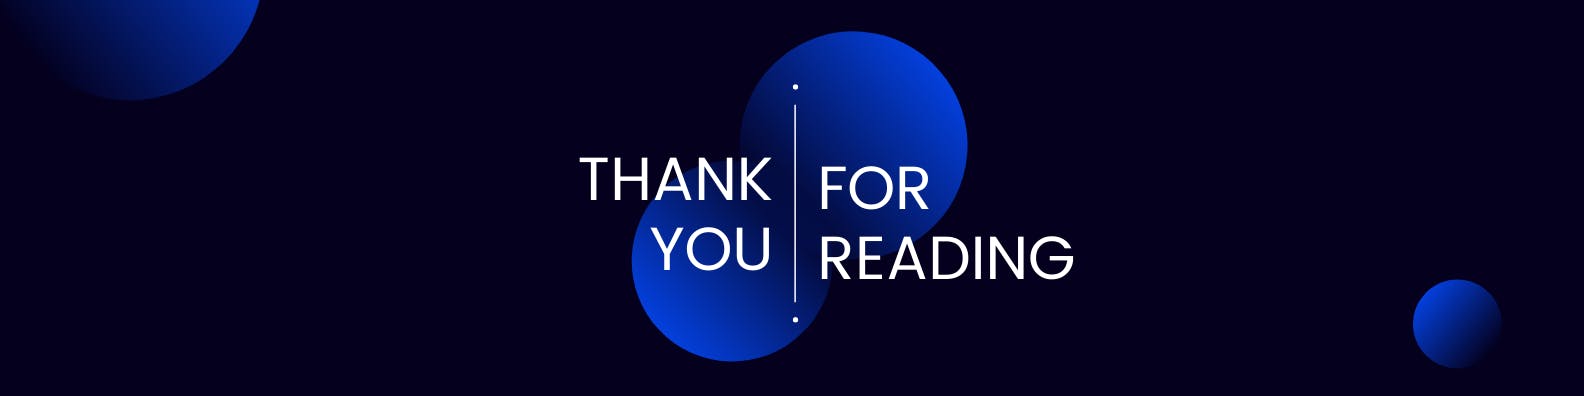 THANK YOU FOR READING.png